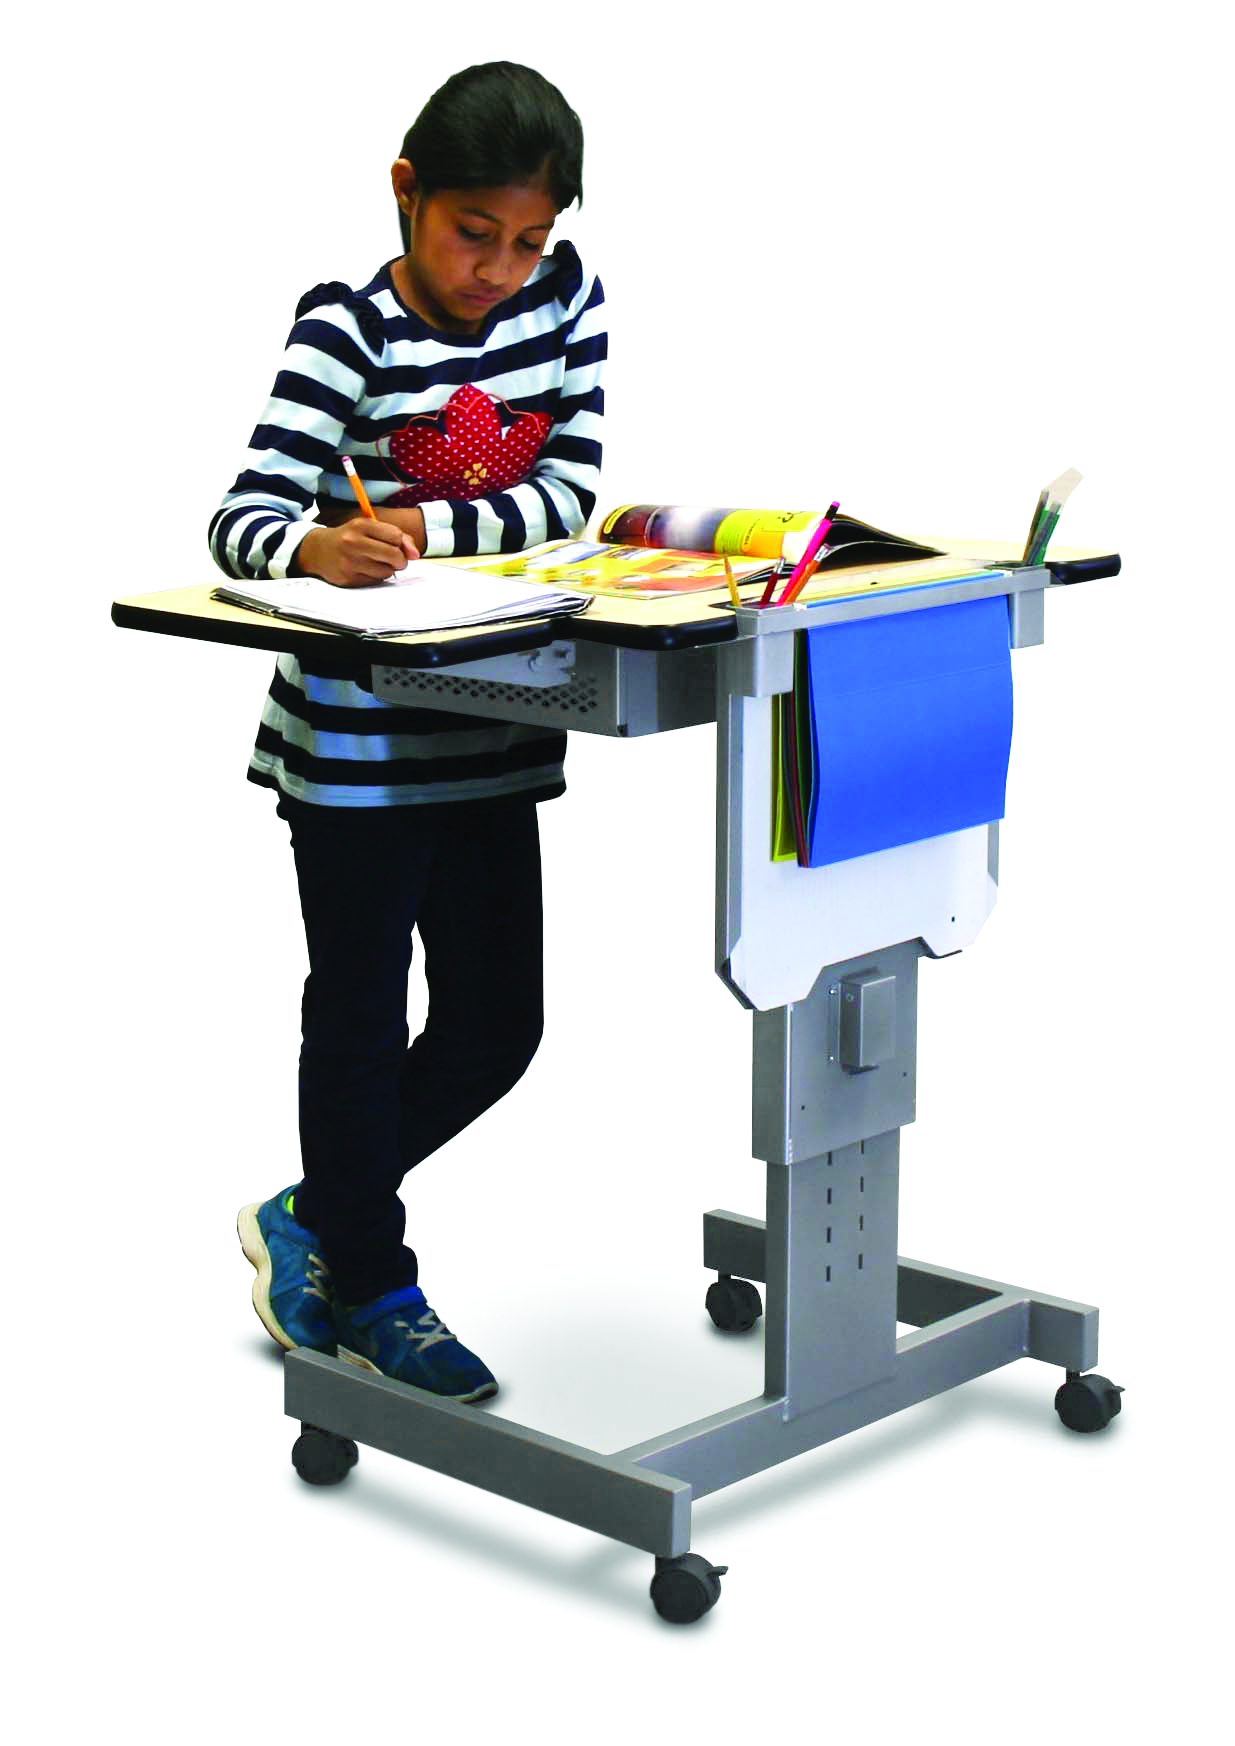 The Focus Desk’s revolutionary FeatherTouch™ lift system allows students to easily control their own desk height.